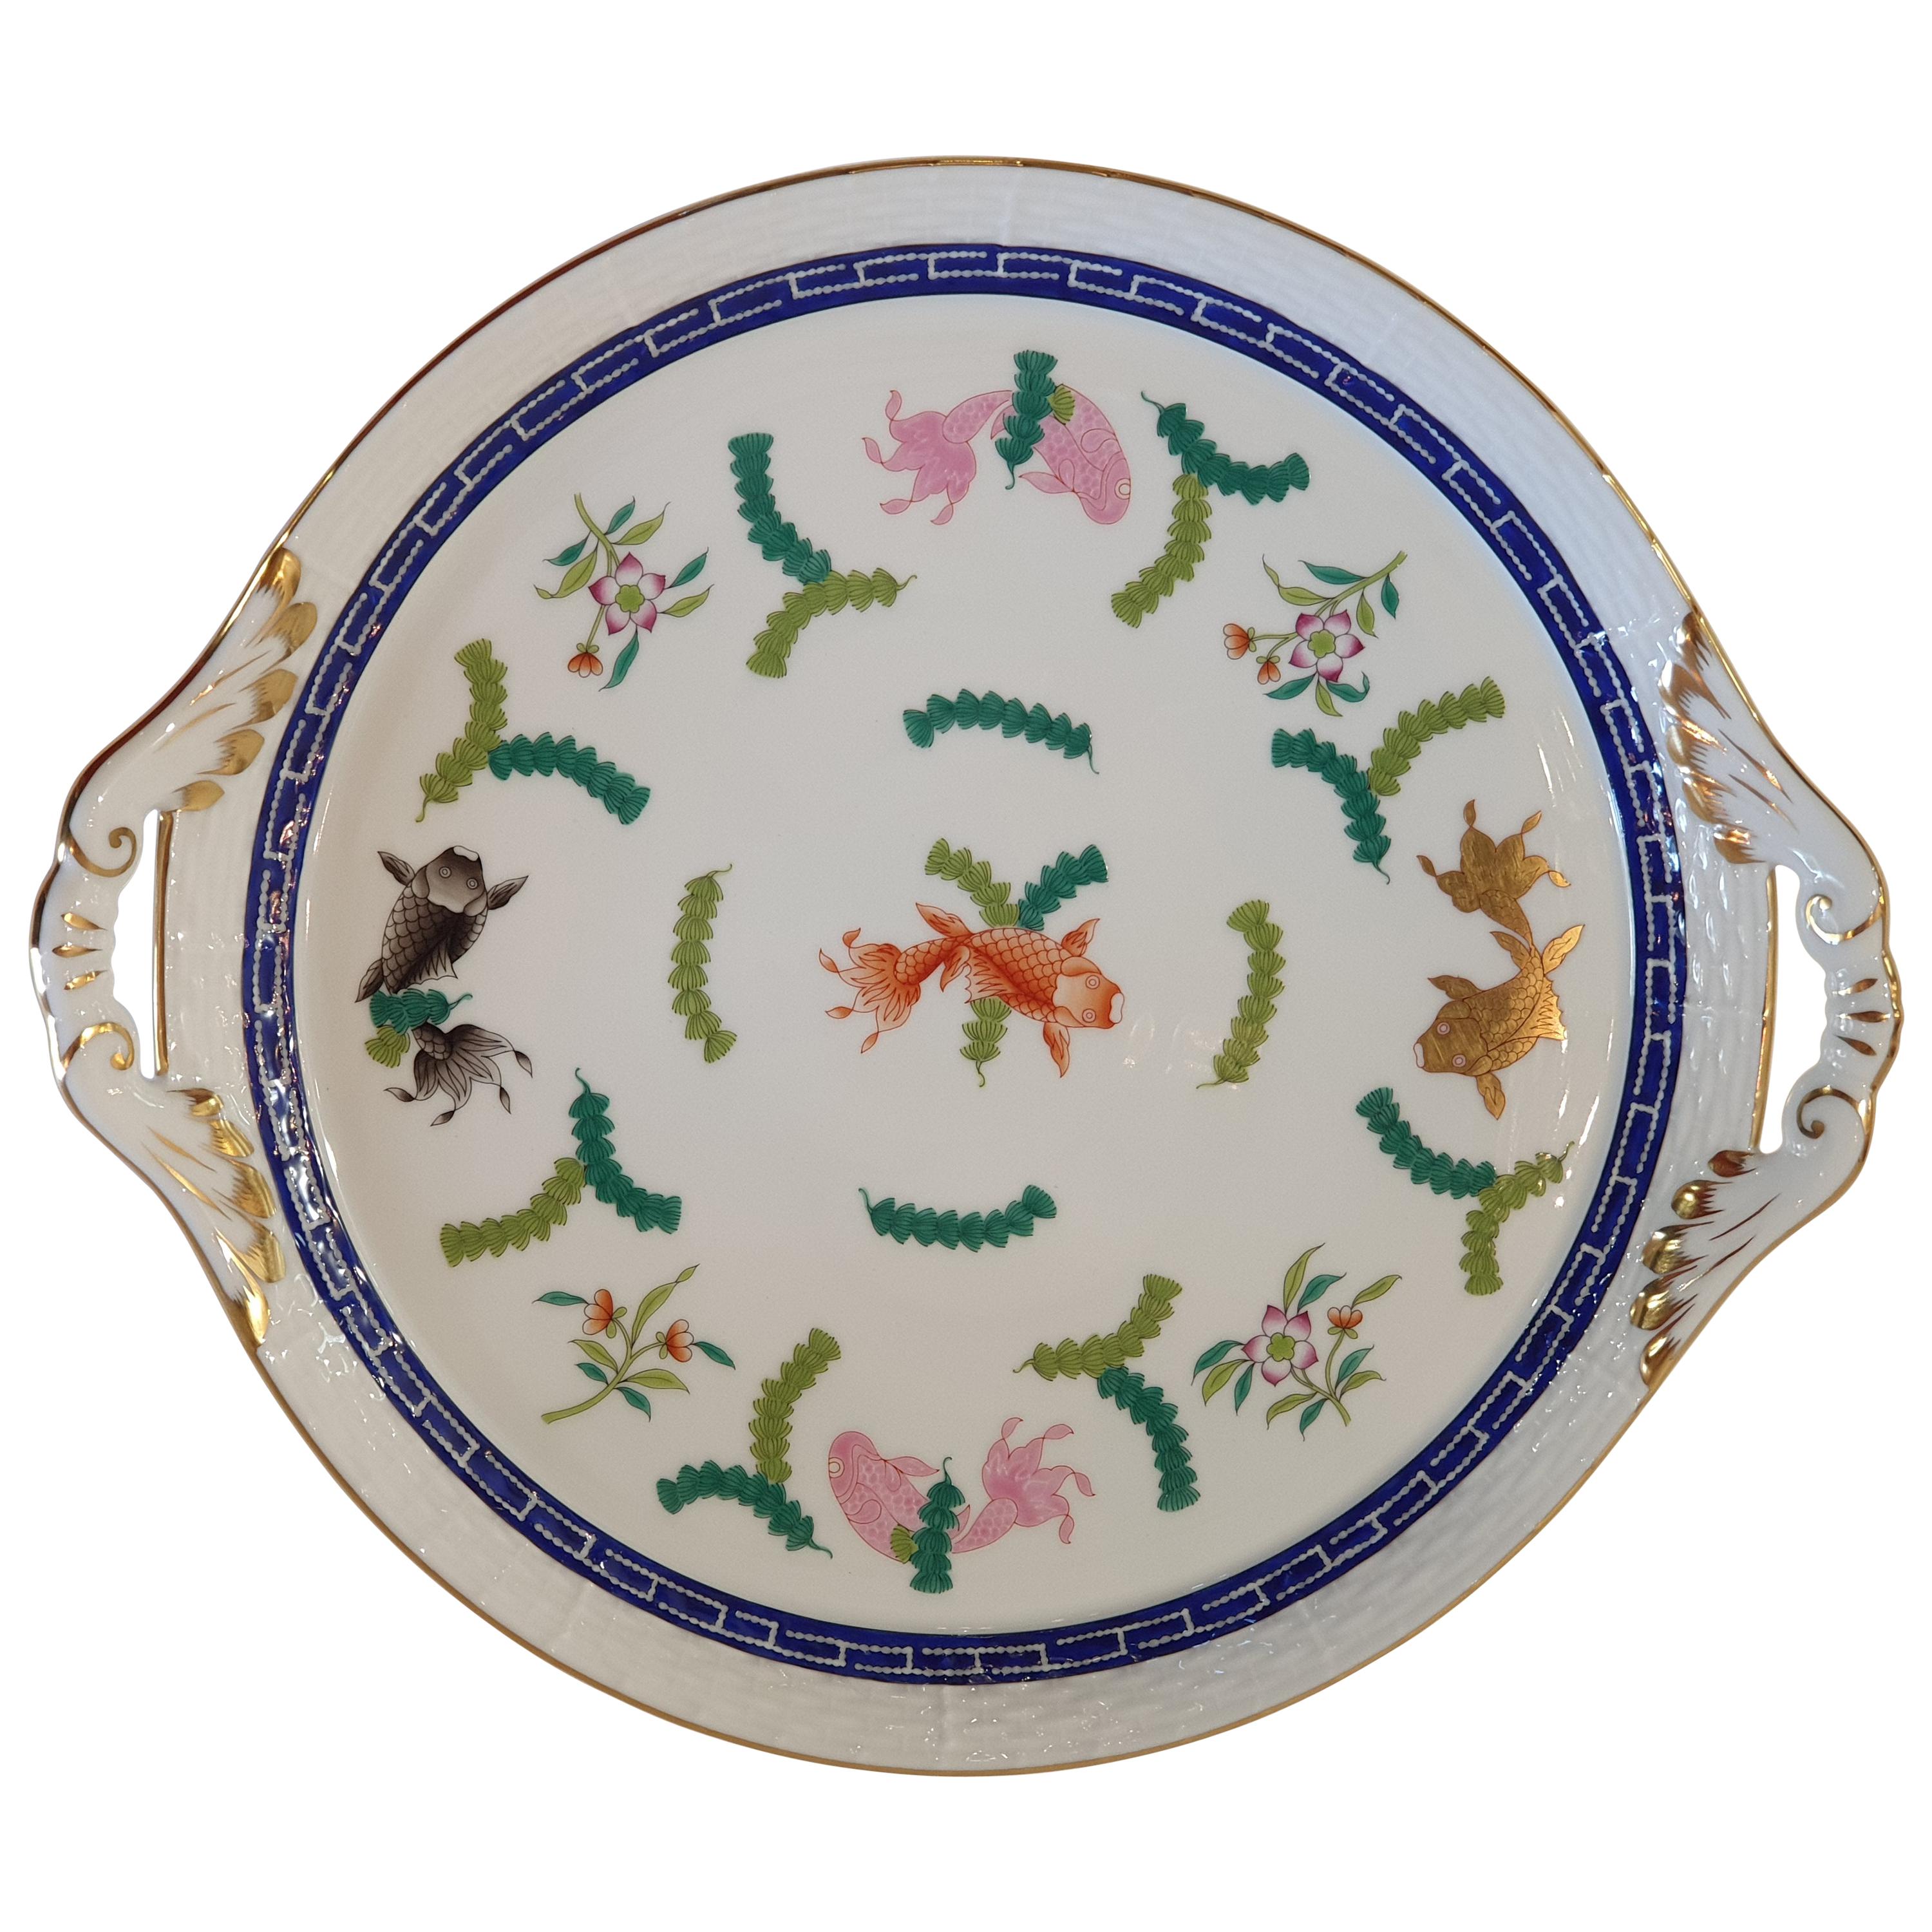 Herend "Poisson" Hand Painted Polychrome Porcelain Cake Plate, Hungary, Modern